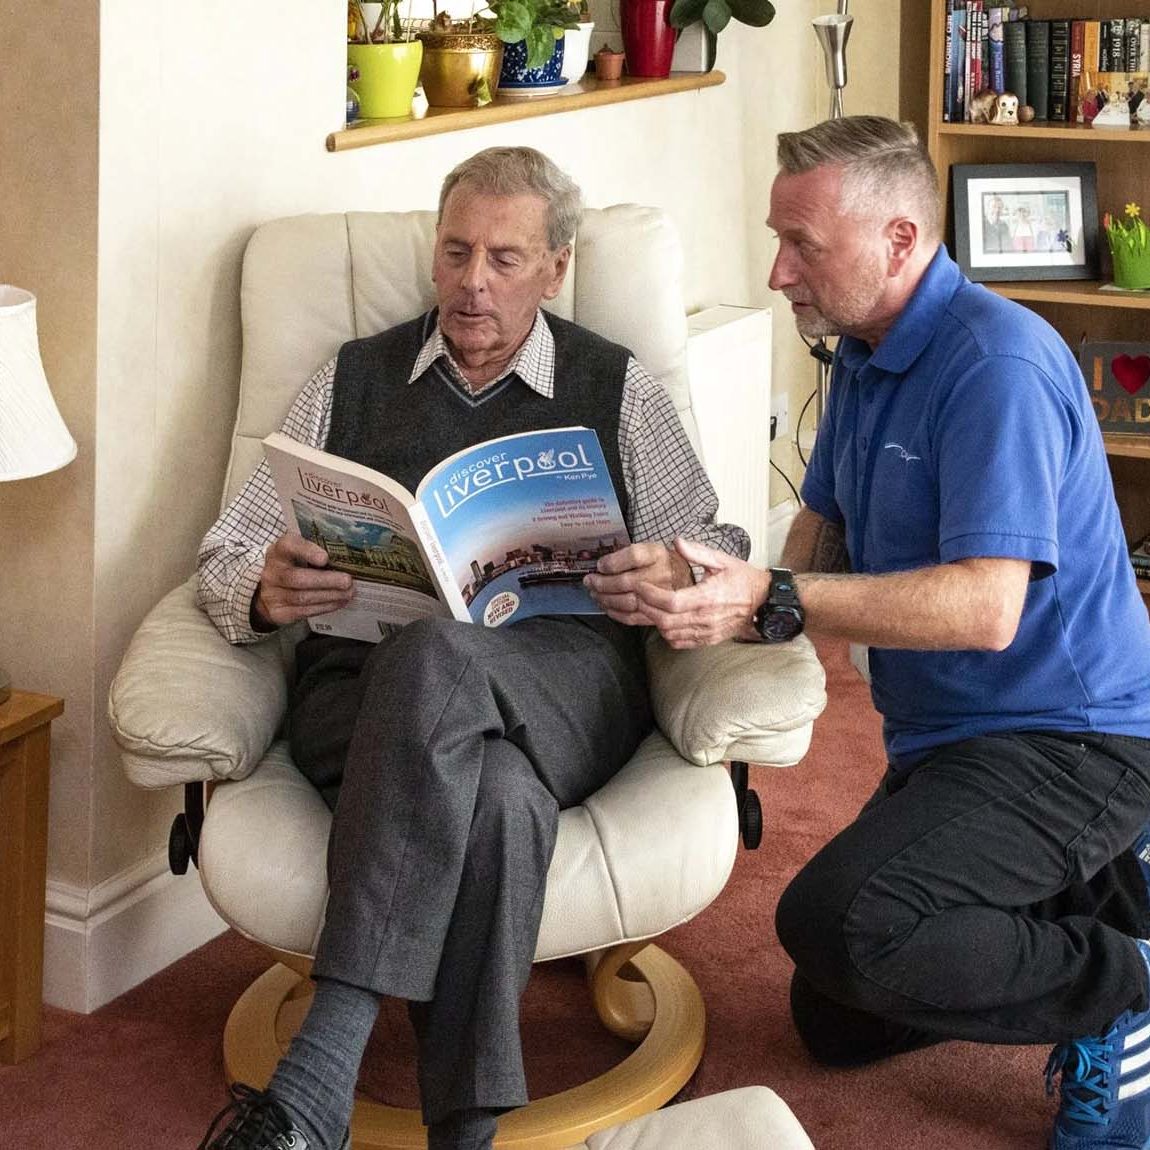 Elderly man getting help with his reading